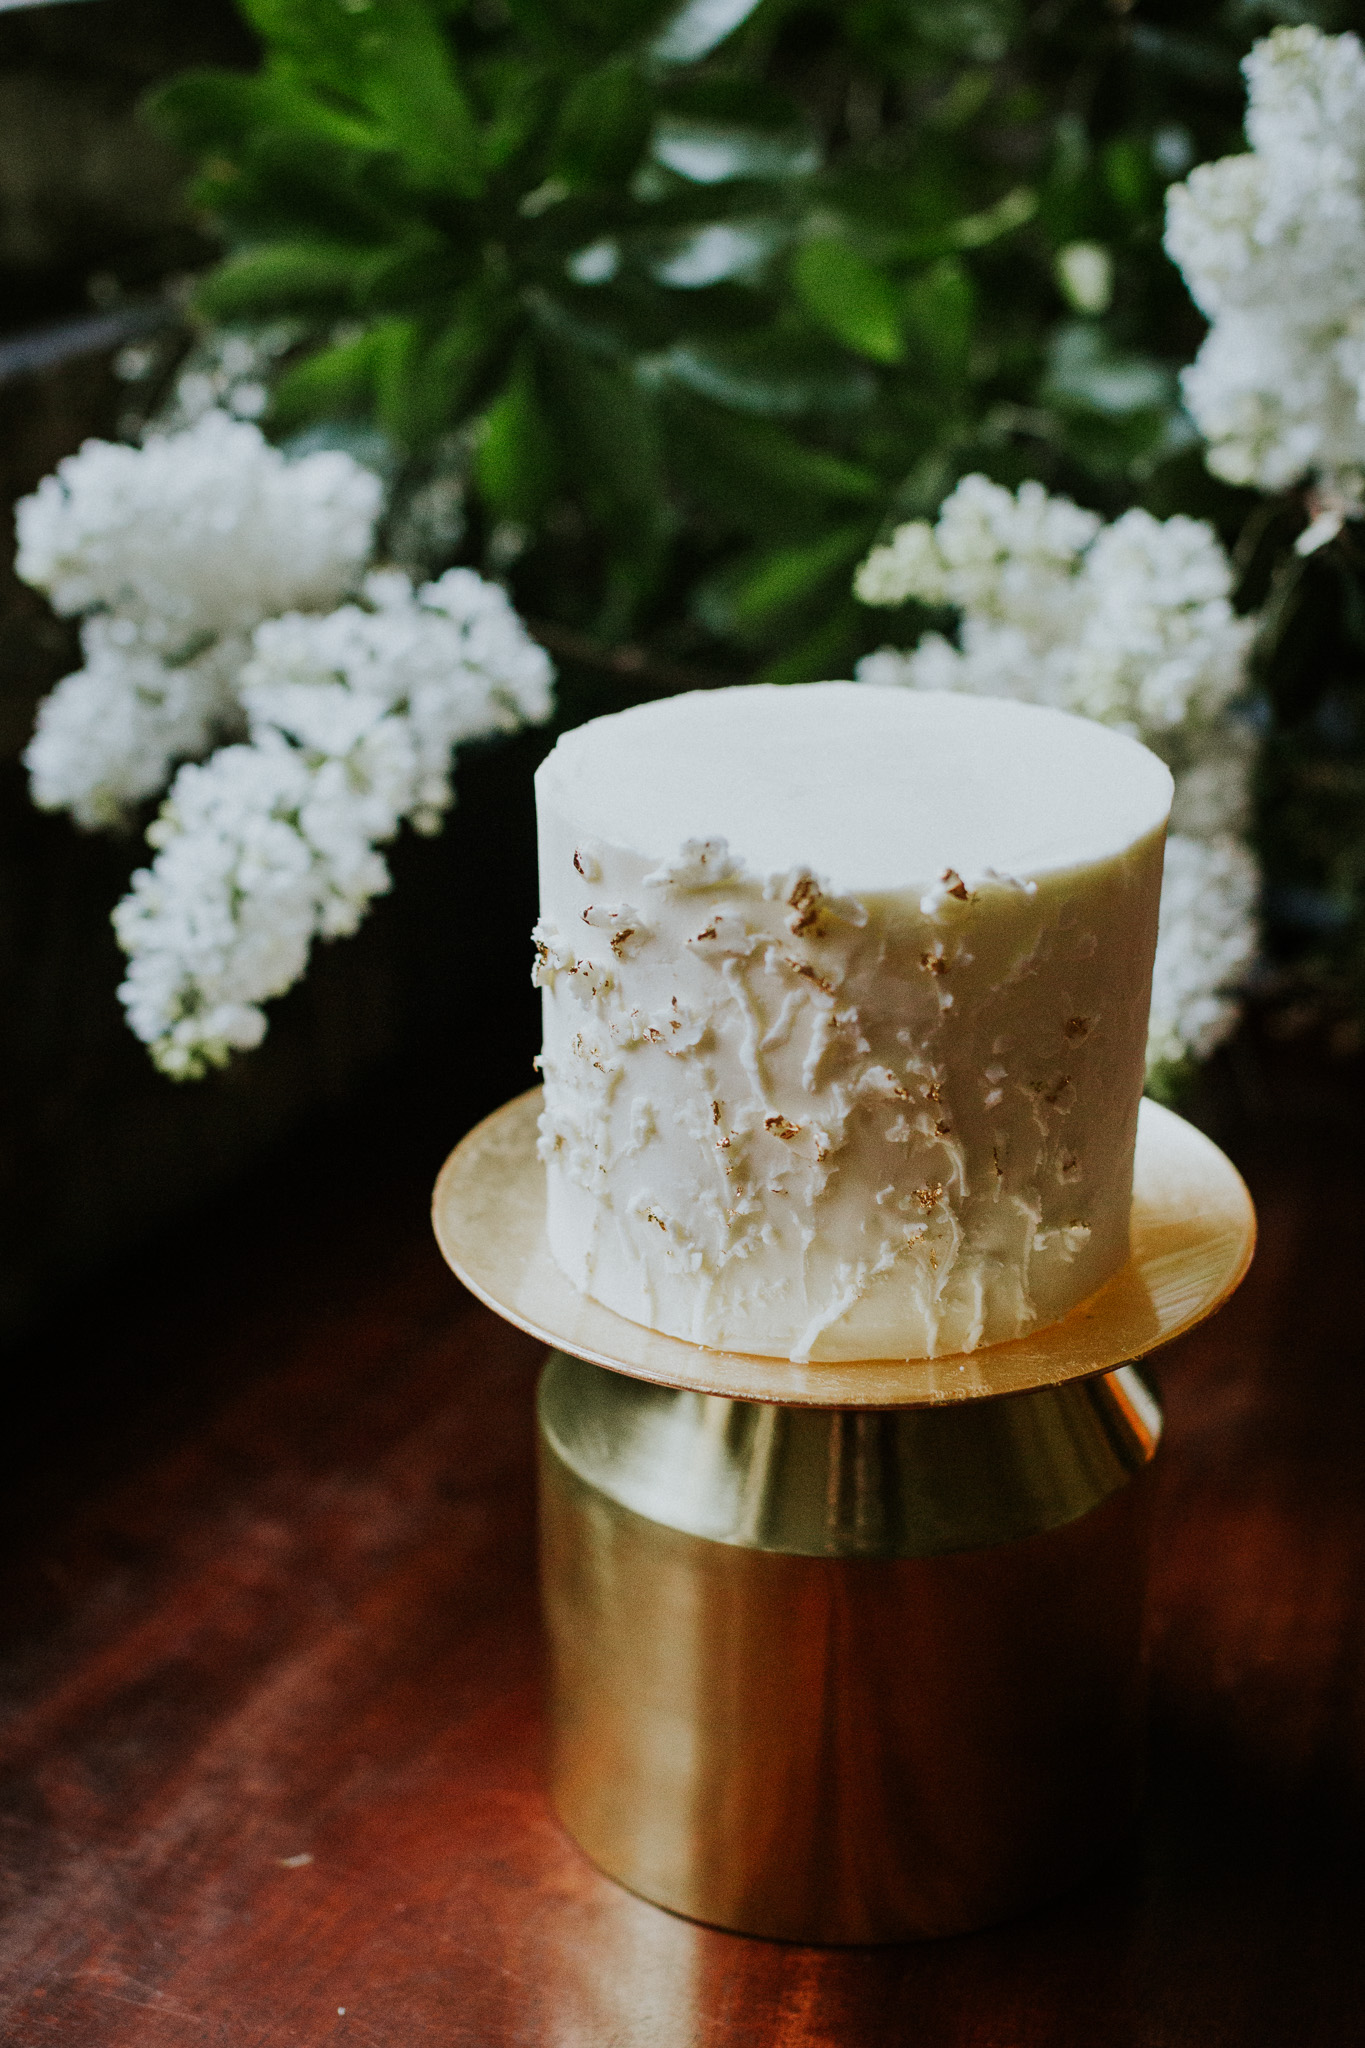 Bas-relief sculptured buttercream wedding cake with natural, organic floral details. Photo by Maja Tsolo